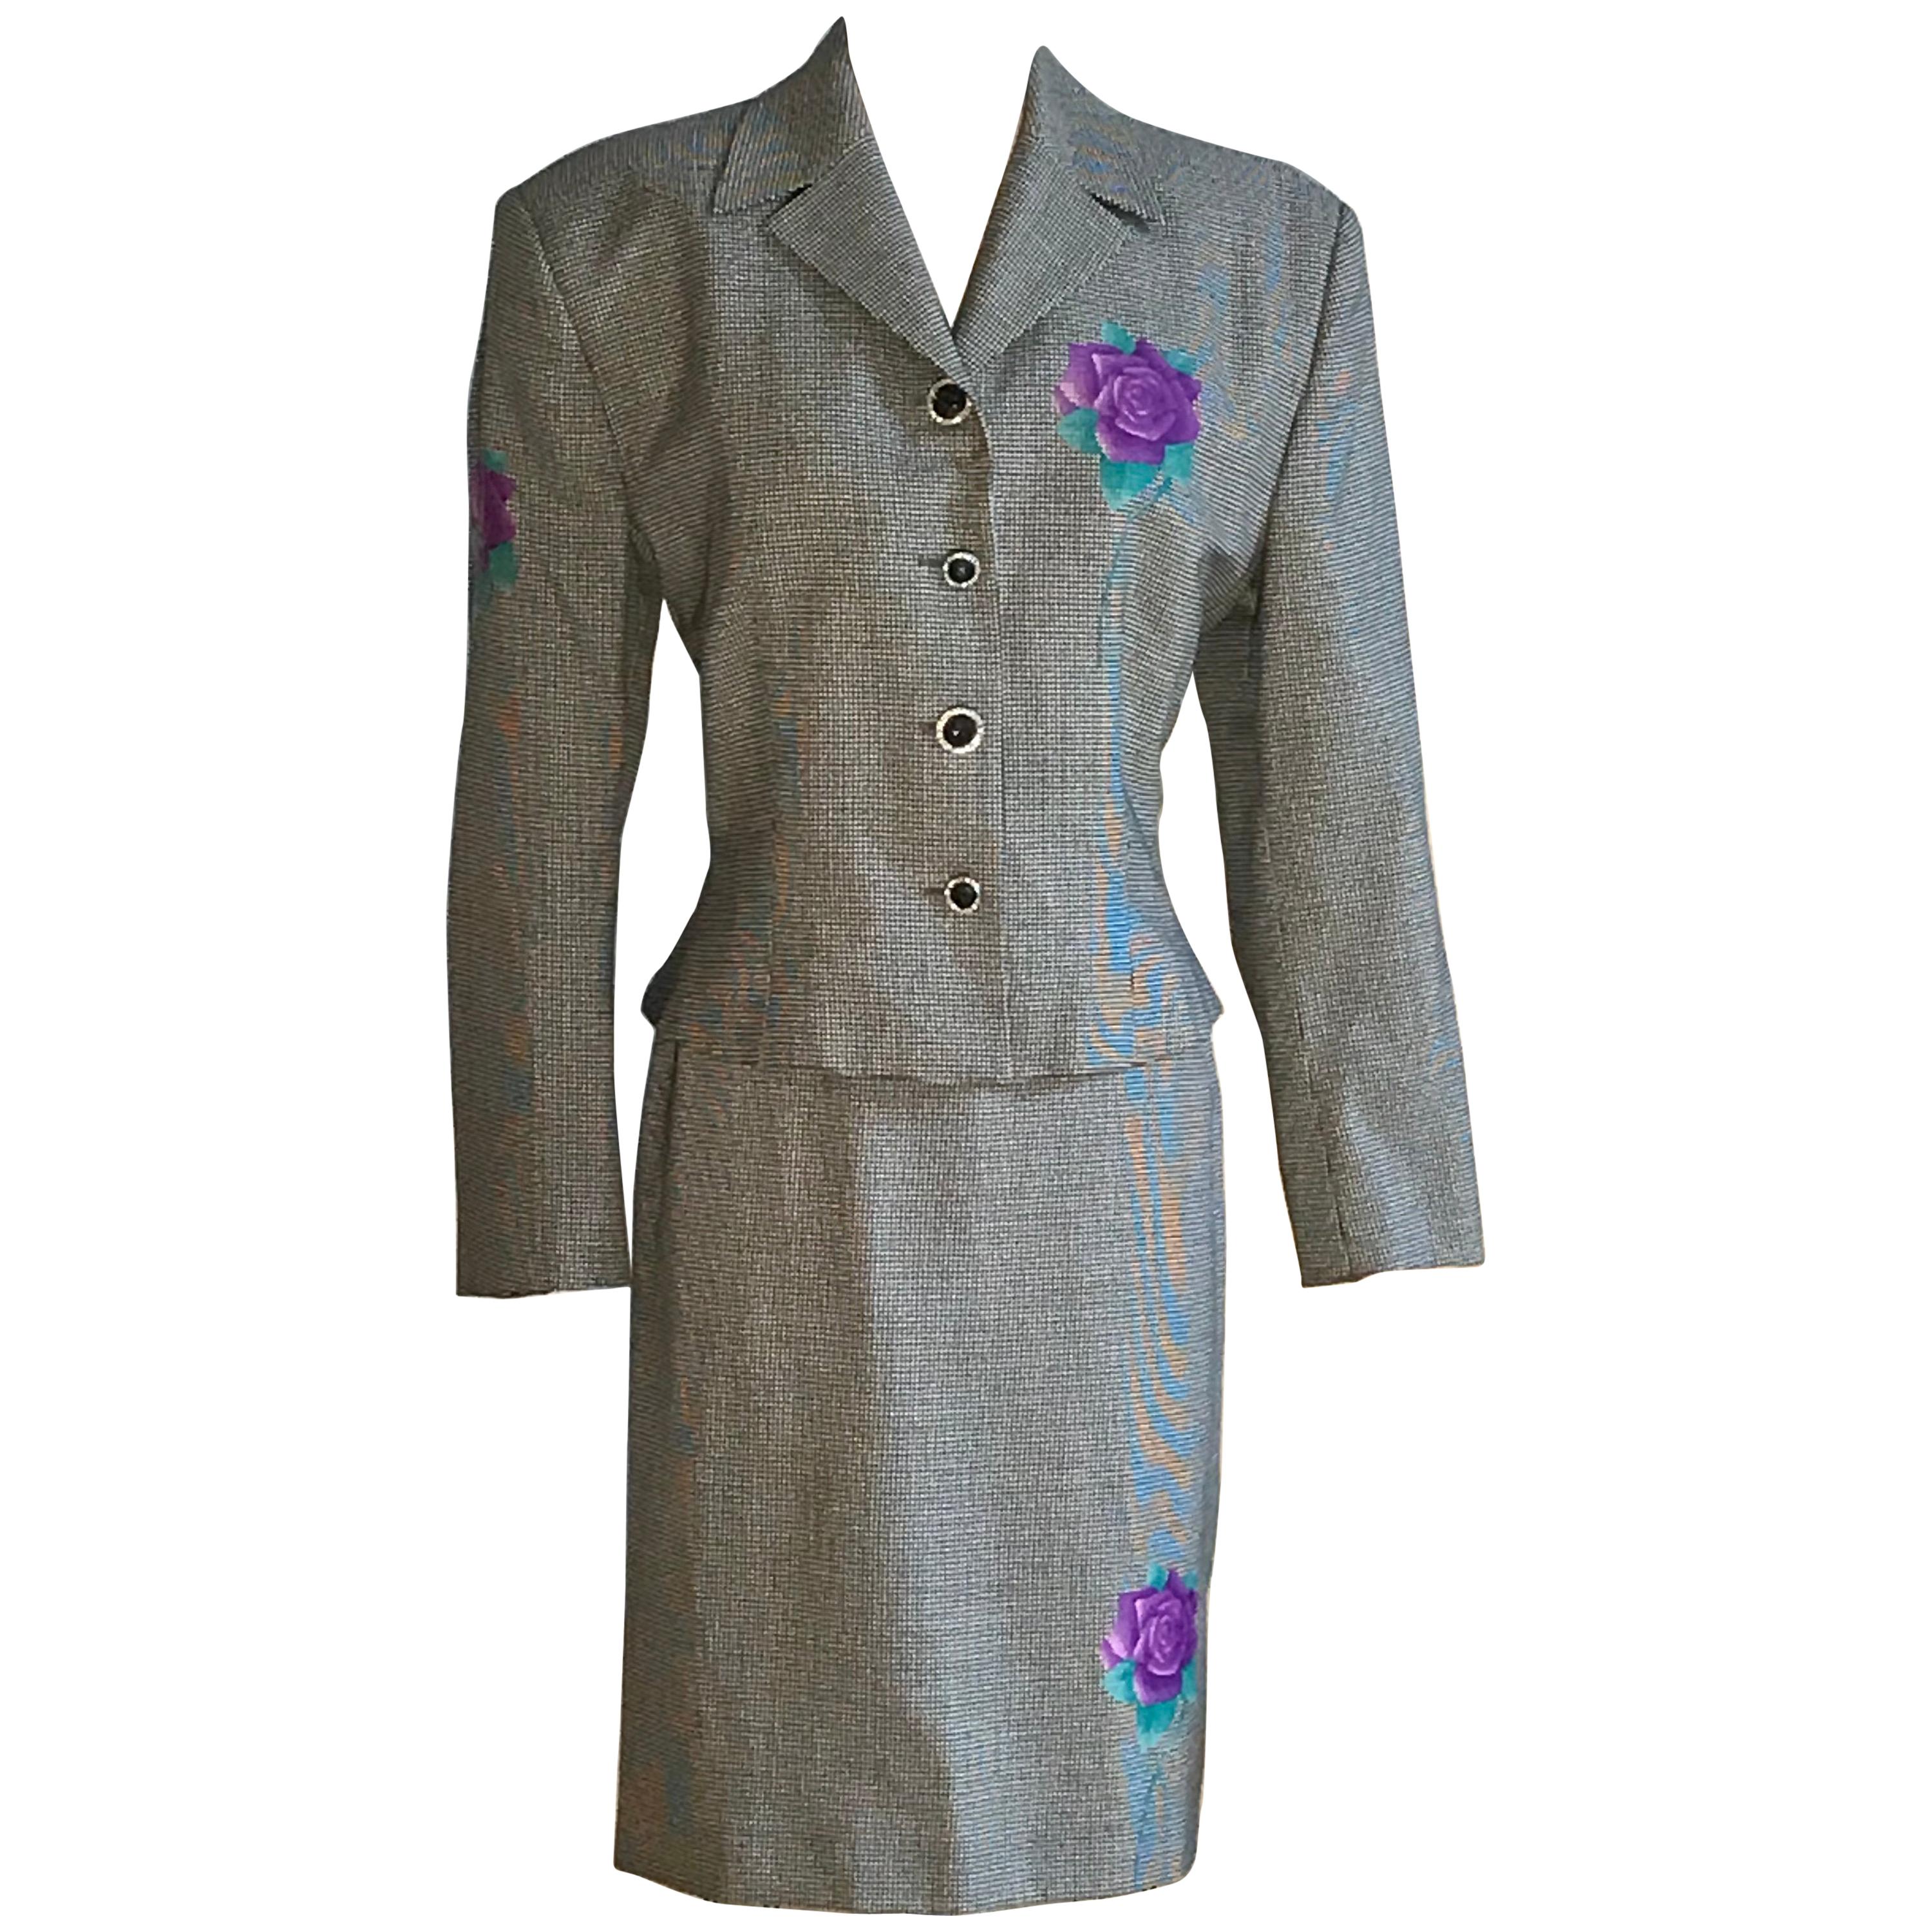 Gianni Versace 1990s Purple Flower Black White Houndstooth Skirt Suit For Sale